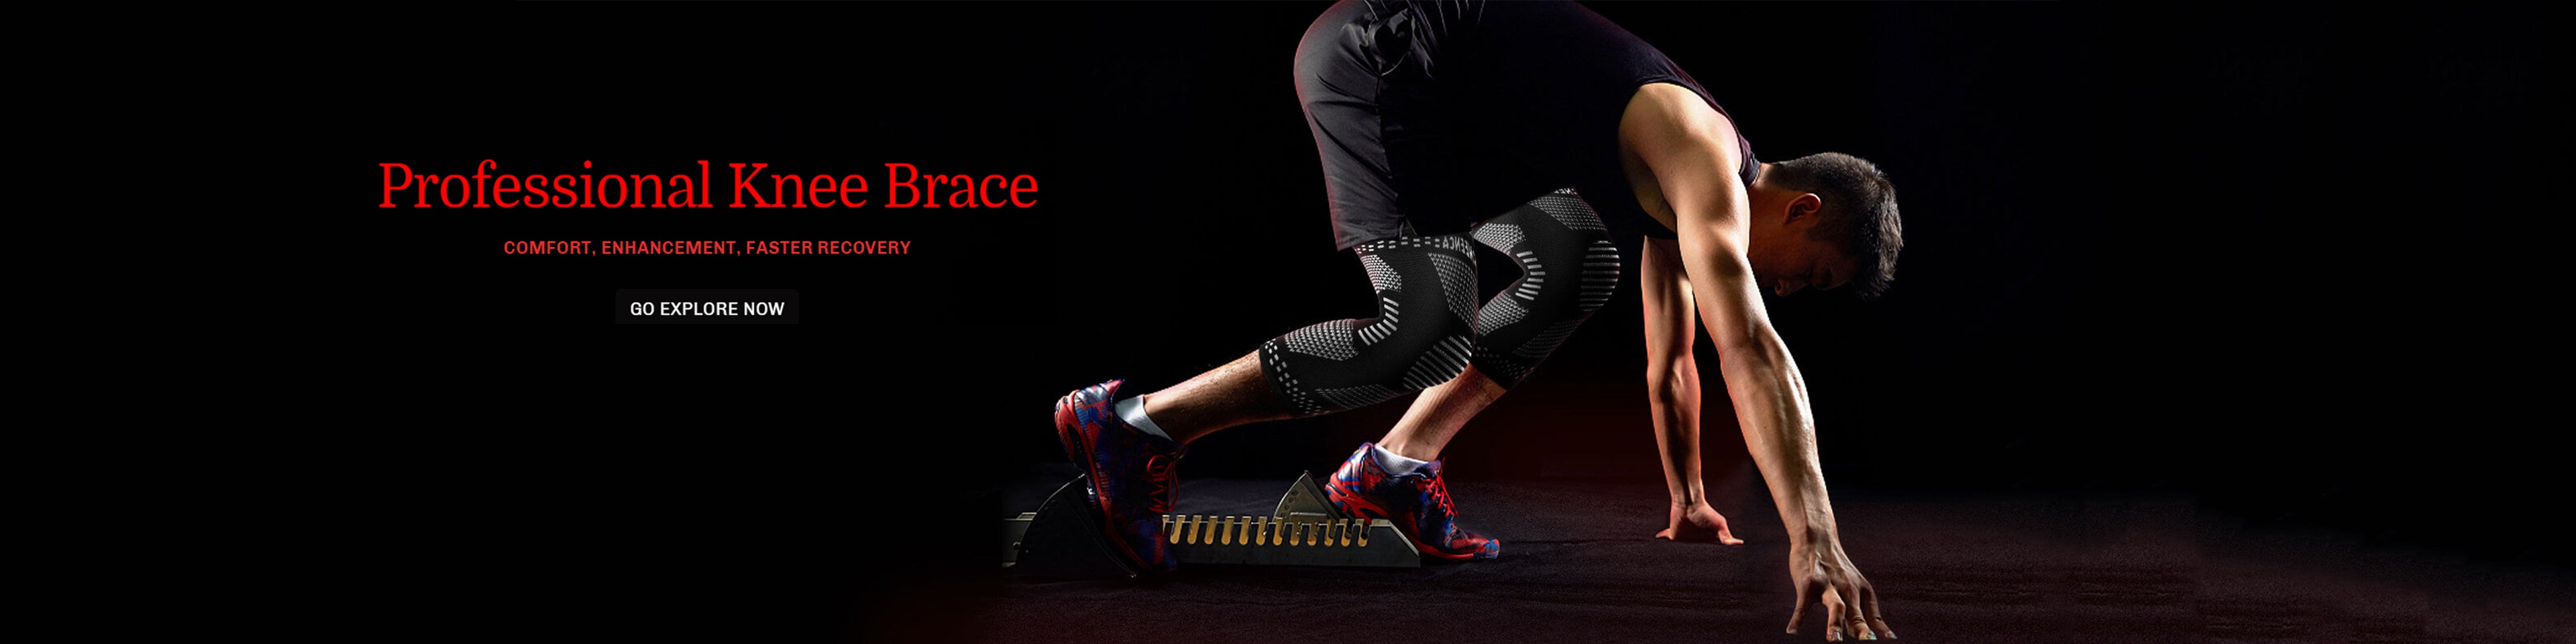 Professional Knee Brace With Side Stabilizers, Adjustable Knee Support With  Meniscus Pad& Patella Gel Pad For Meniscus Tear Knee Pain Acl Mcl Injury R